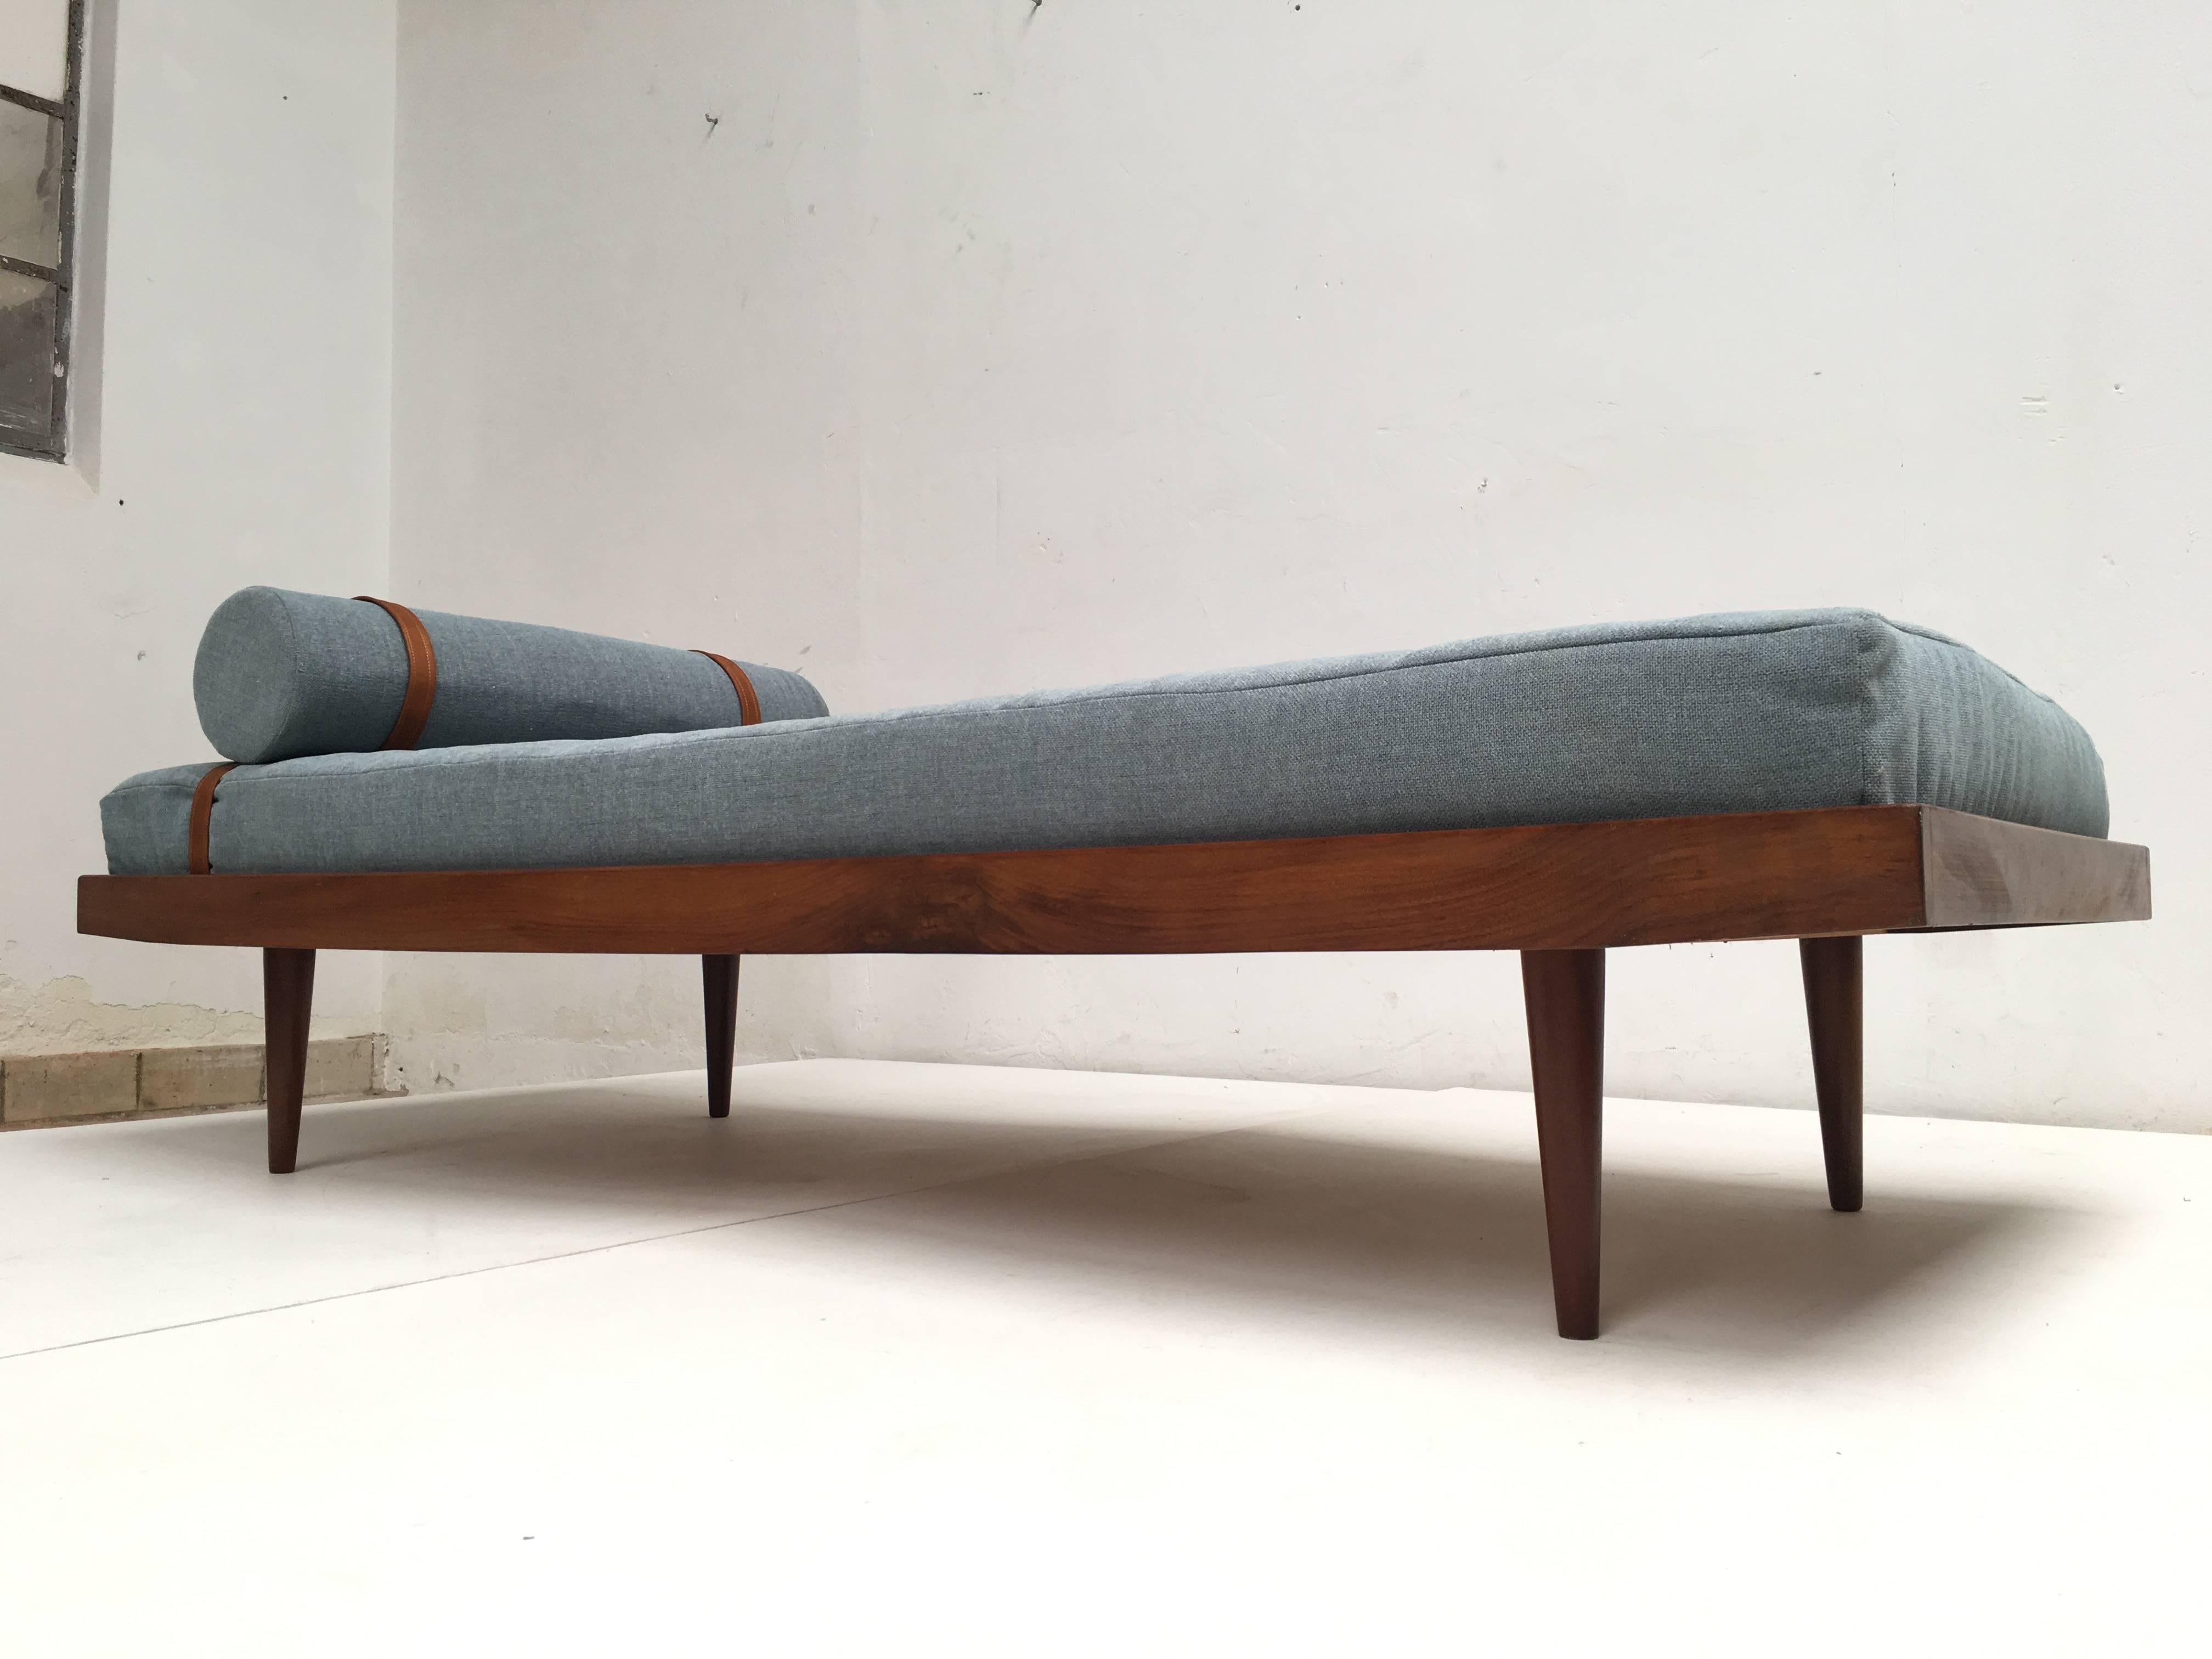 Scandinavian daybed in solid Teak wood with new upholstery

The mattress has Latex foam and we used light blue De Ploeg "Steppe" wool upholstery with a neck roll held by leather straps

Very comfortable for a quick daytime nap 